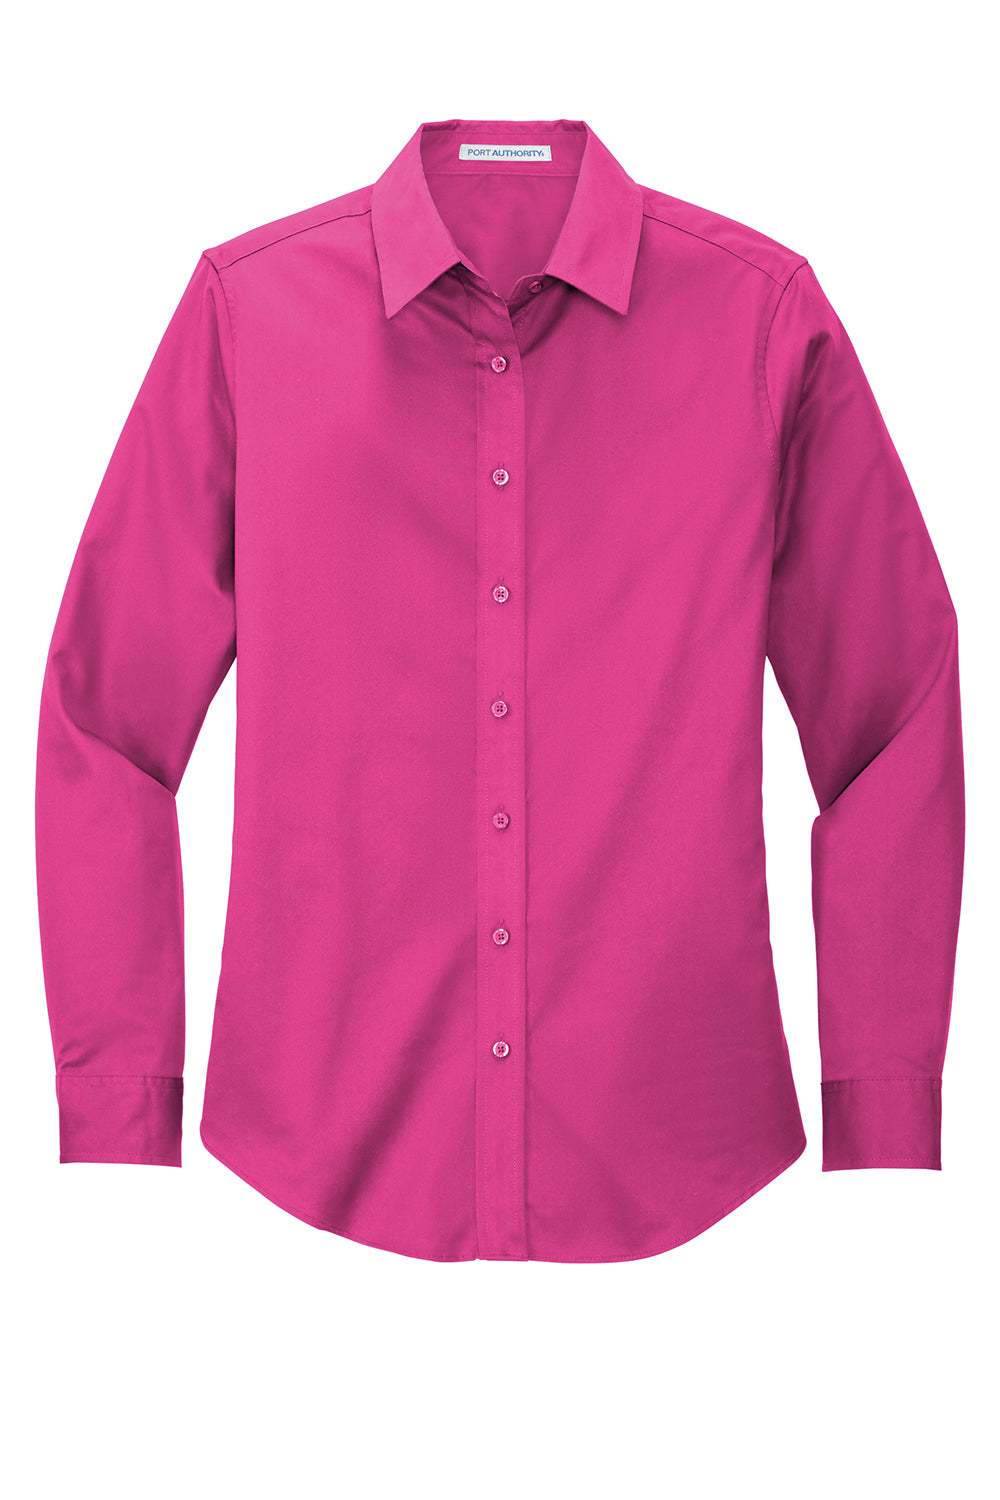 Port Authority L608 Womens Easy Care Wrinkle Resistant Long Sleeve Button Down Shirt Tropical Pink Flat Front